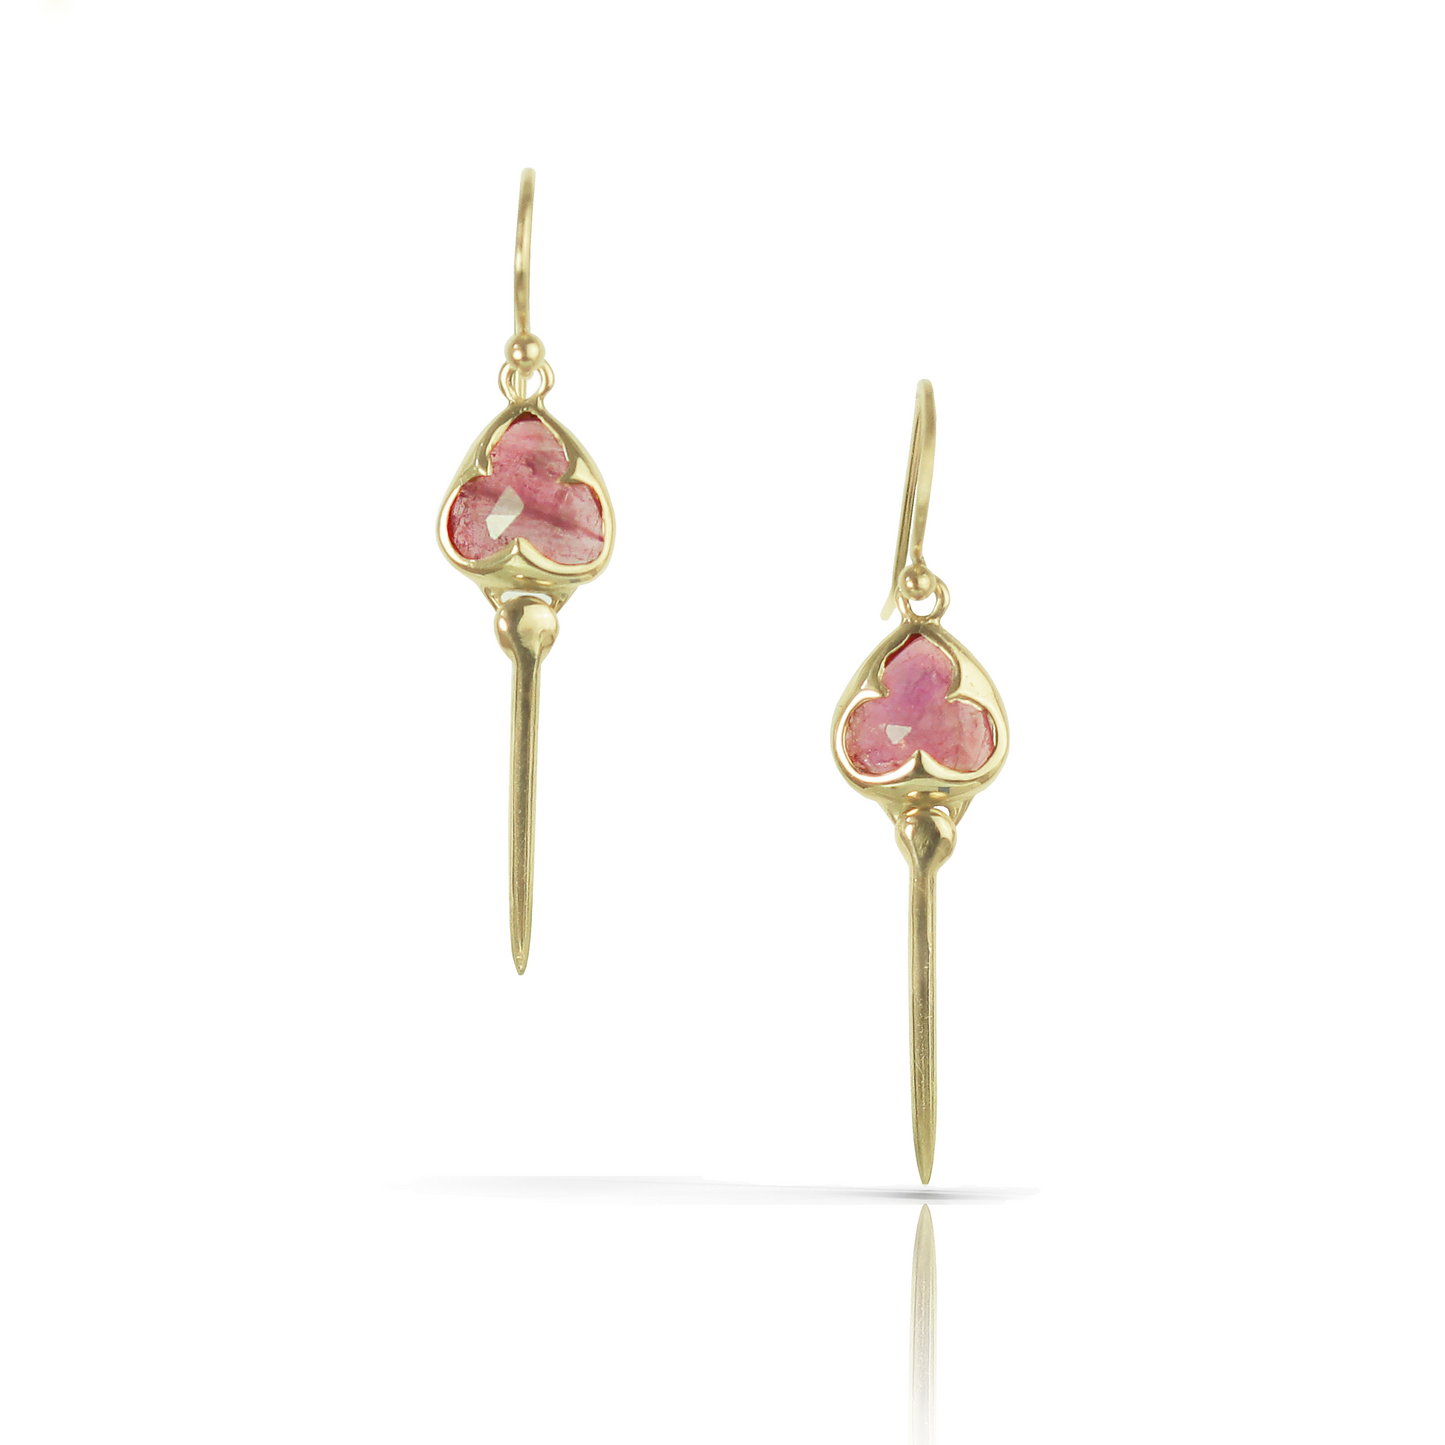 Yellow gold earrings with french hooks, bezel set pink tourmaline stones, and an elongated tail dangling from the bottom